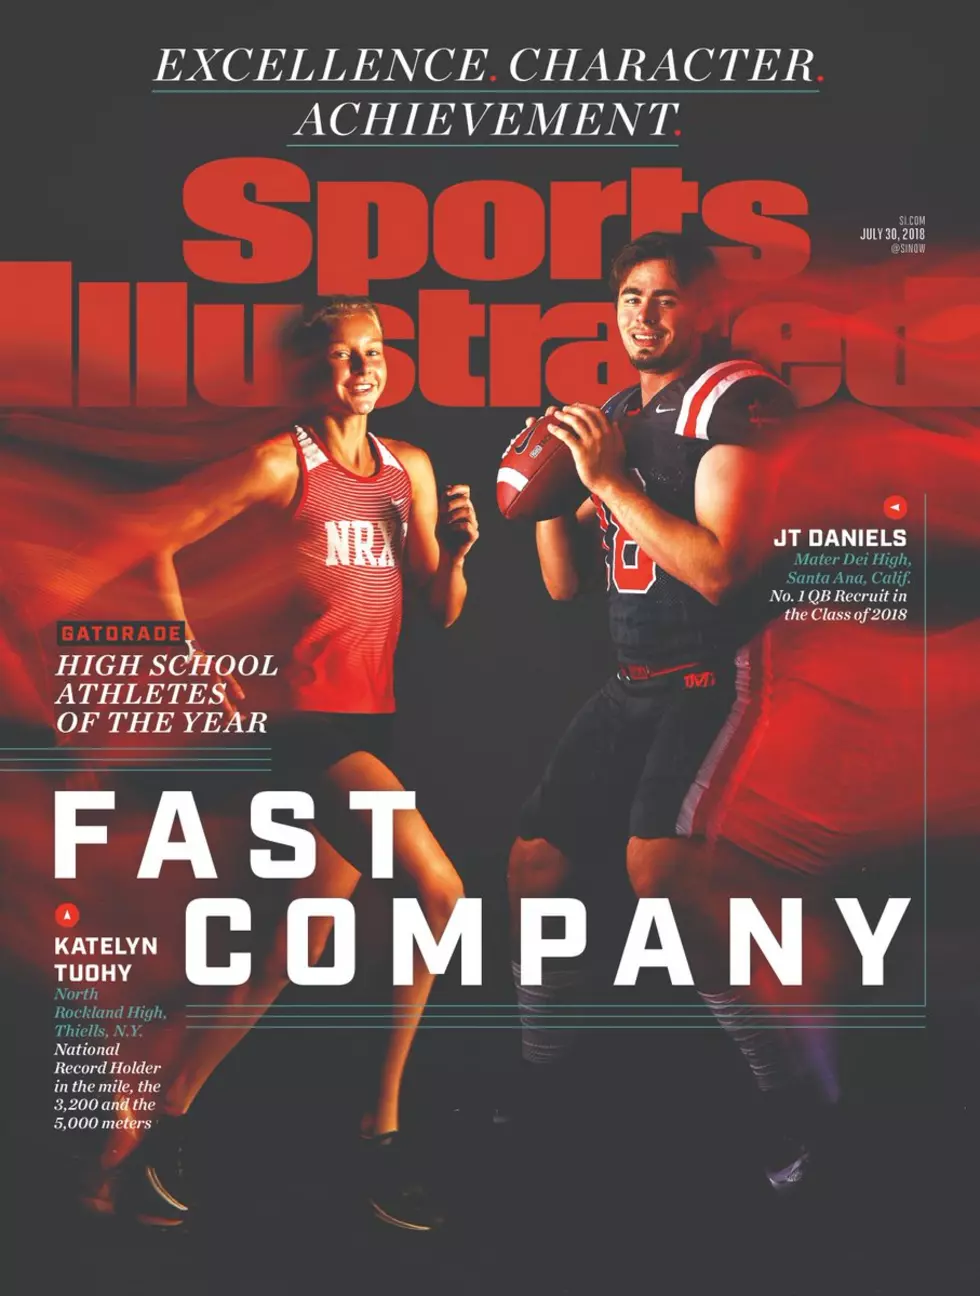 Hudson Valley Teen Featured on Sports Illustrated Cover